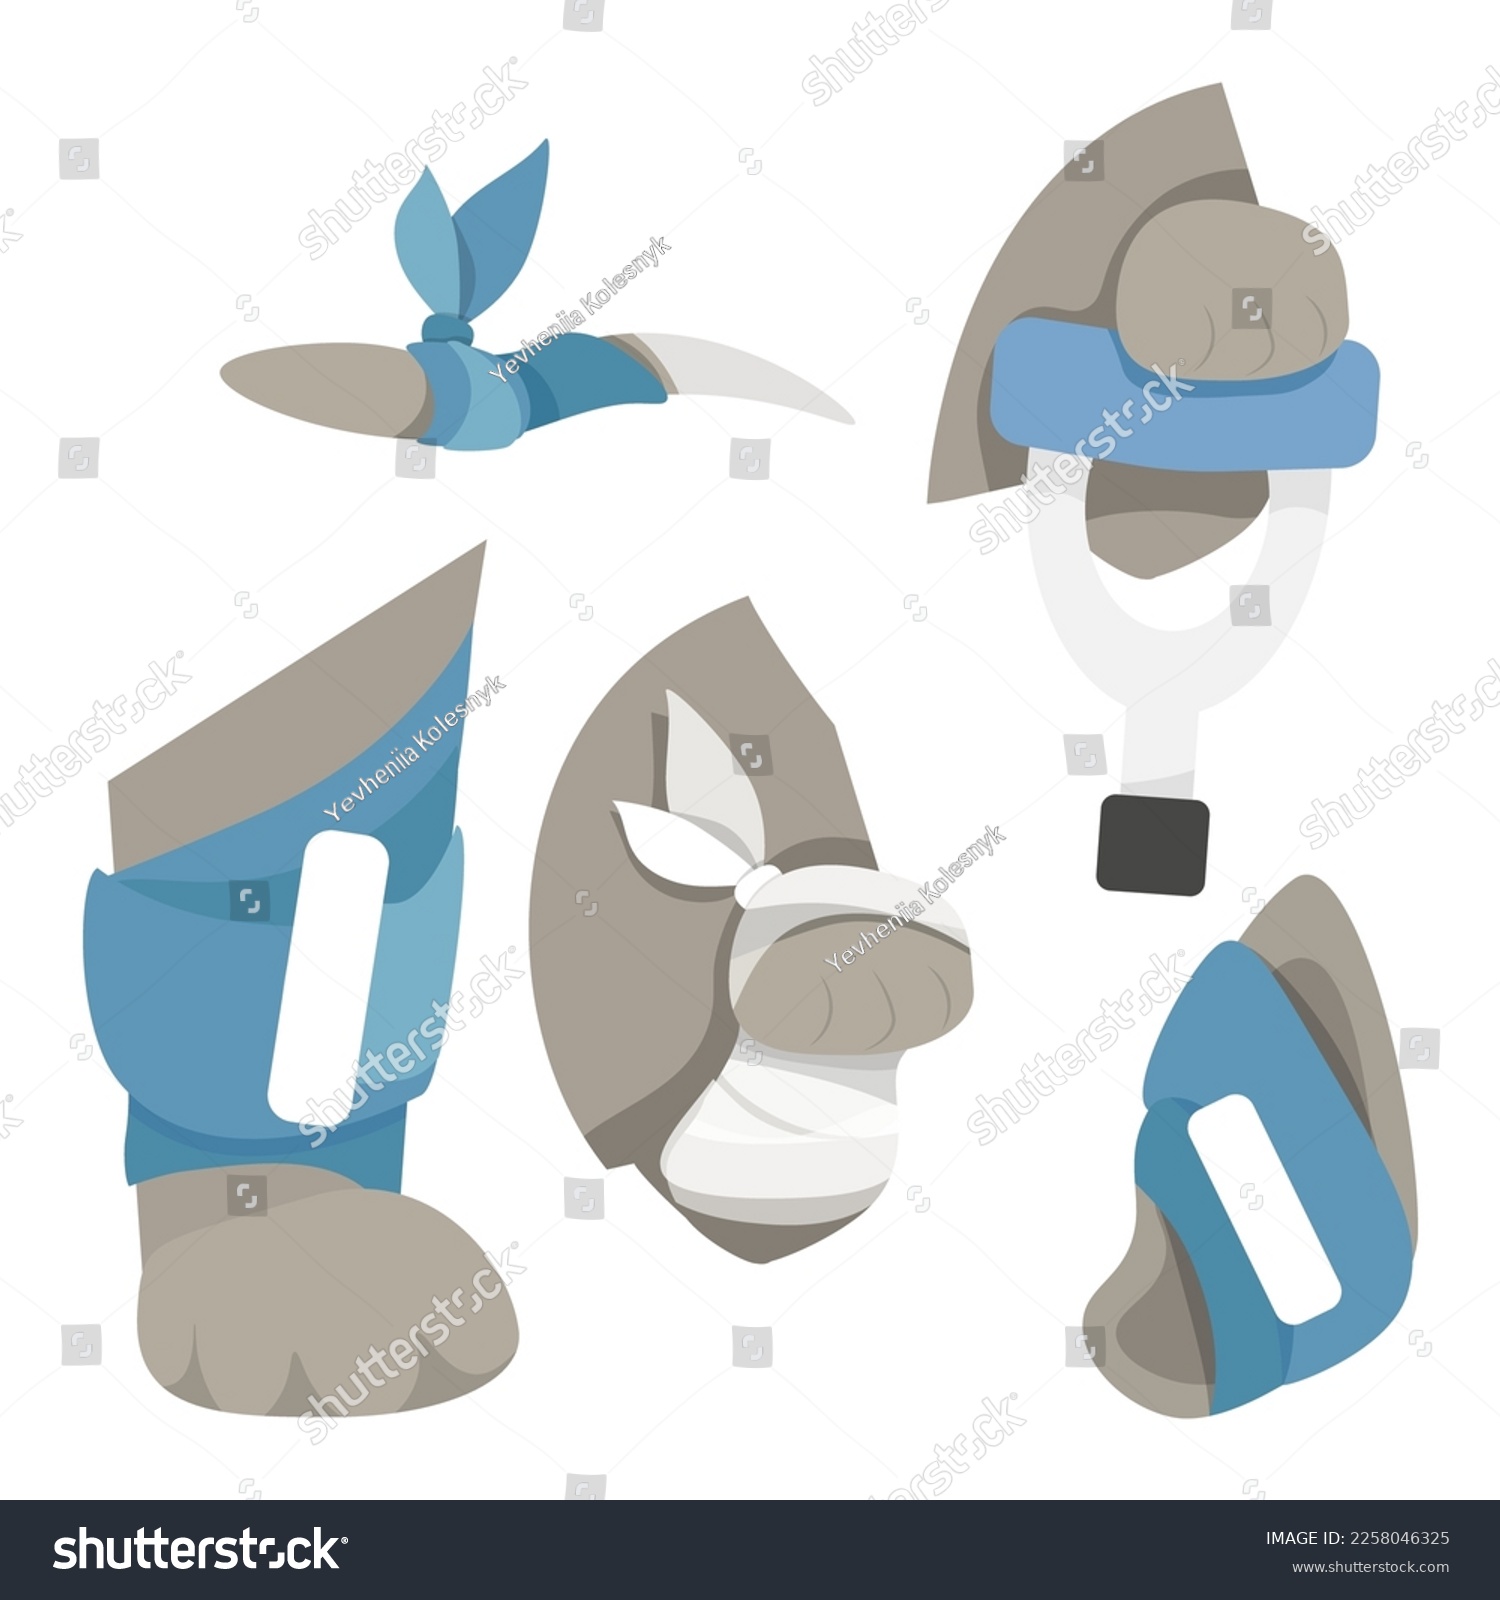 SVG of Set of bandaged paw, tail, ear of an animal svg